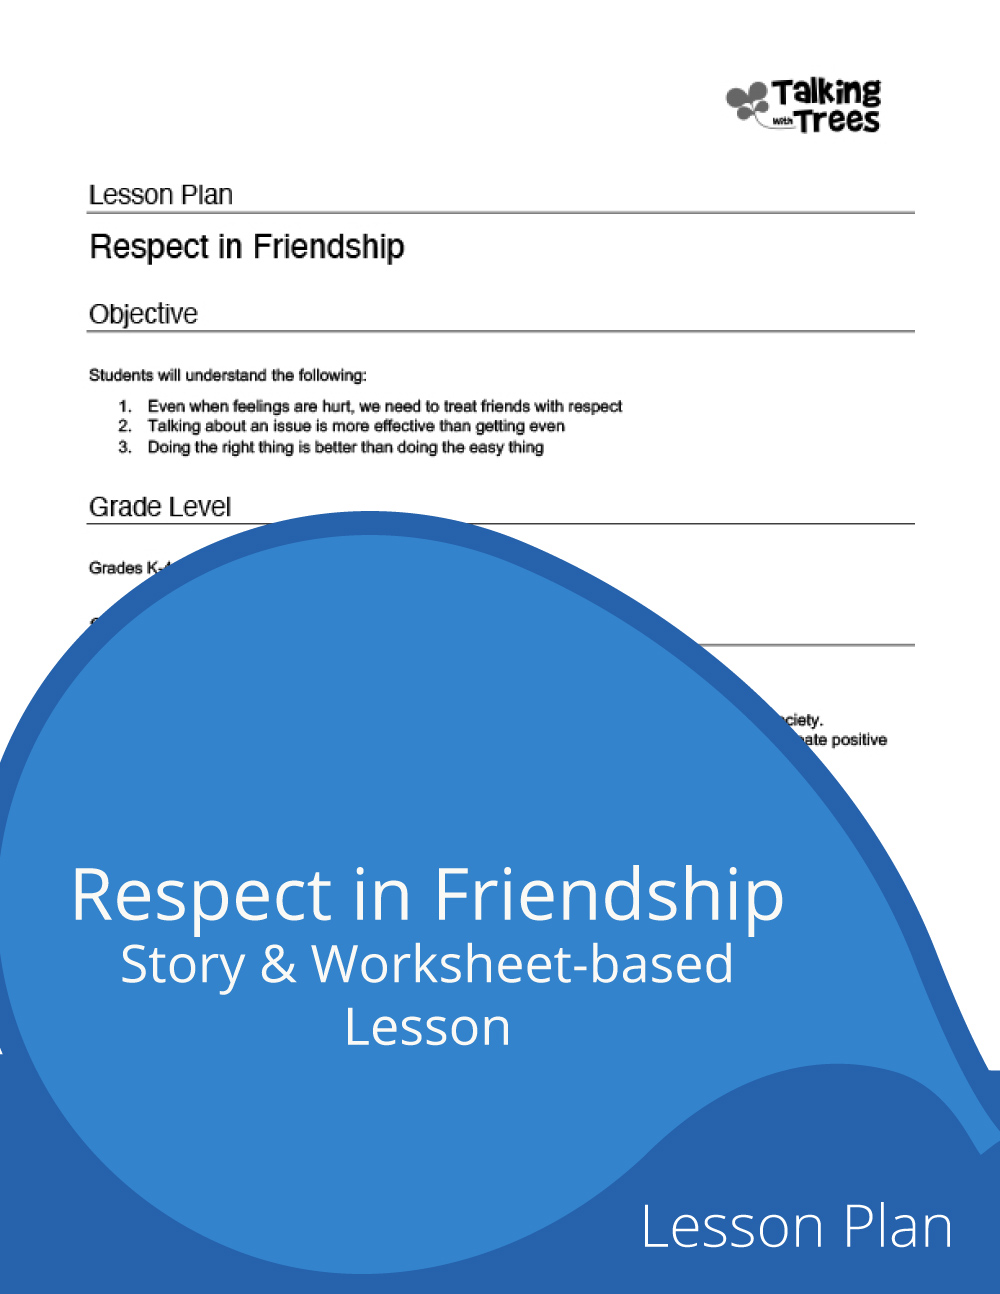 Respect in Friendship Lesson Plan Character Ed / SEL for kids